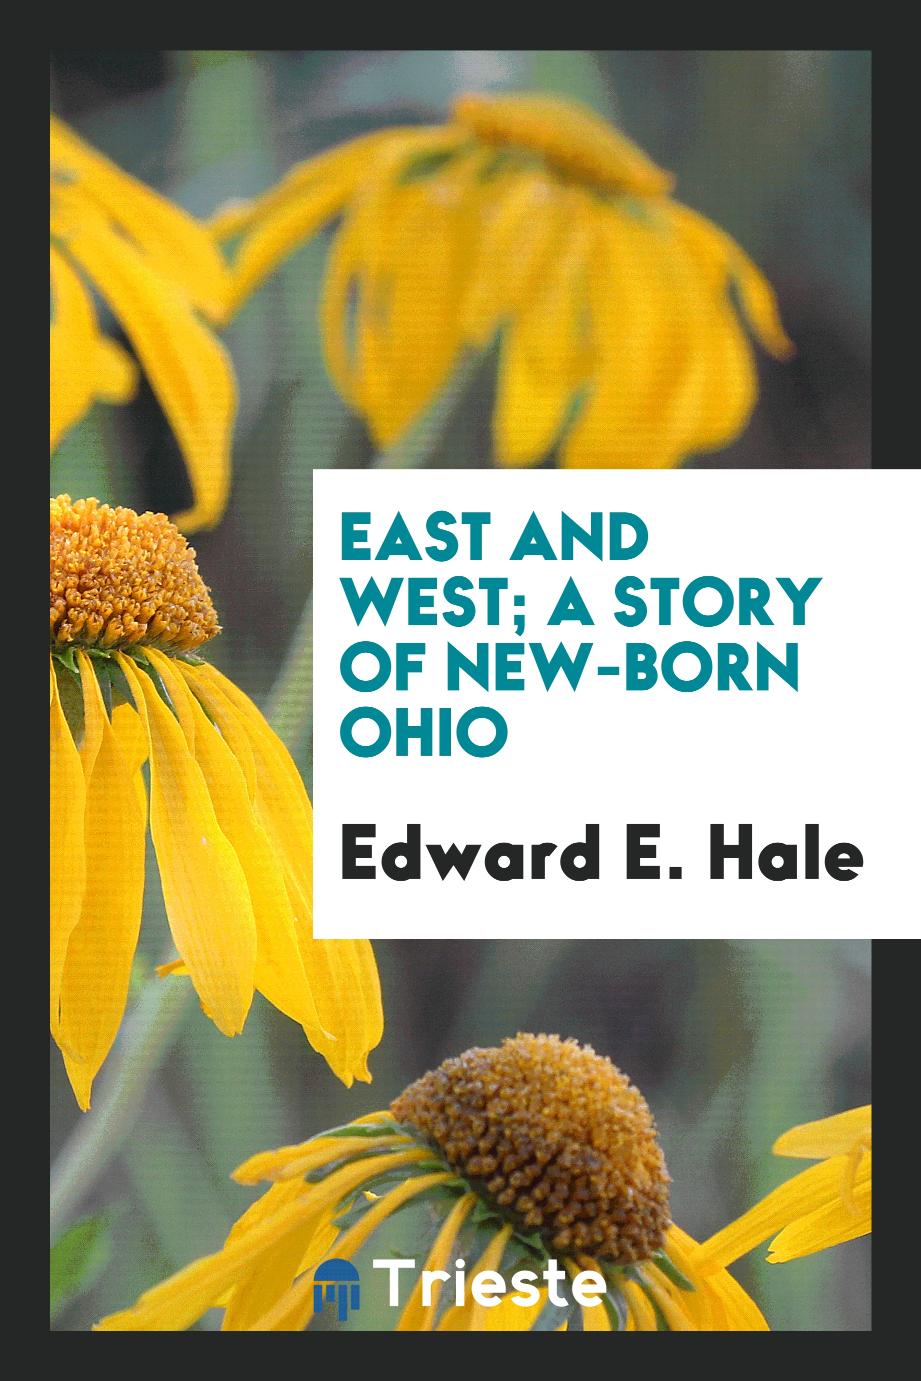 East and West; a story of new-born Ohio